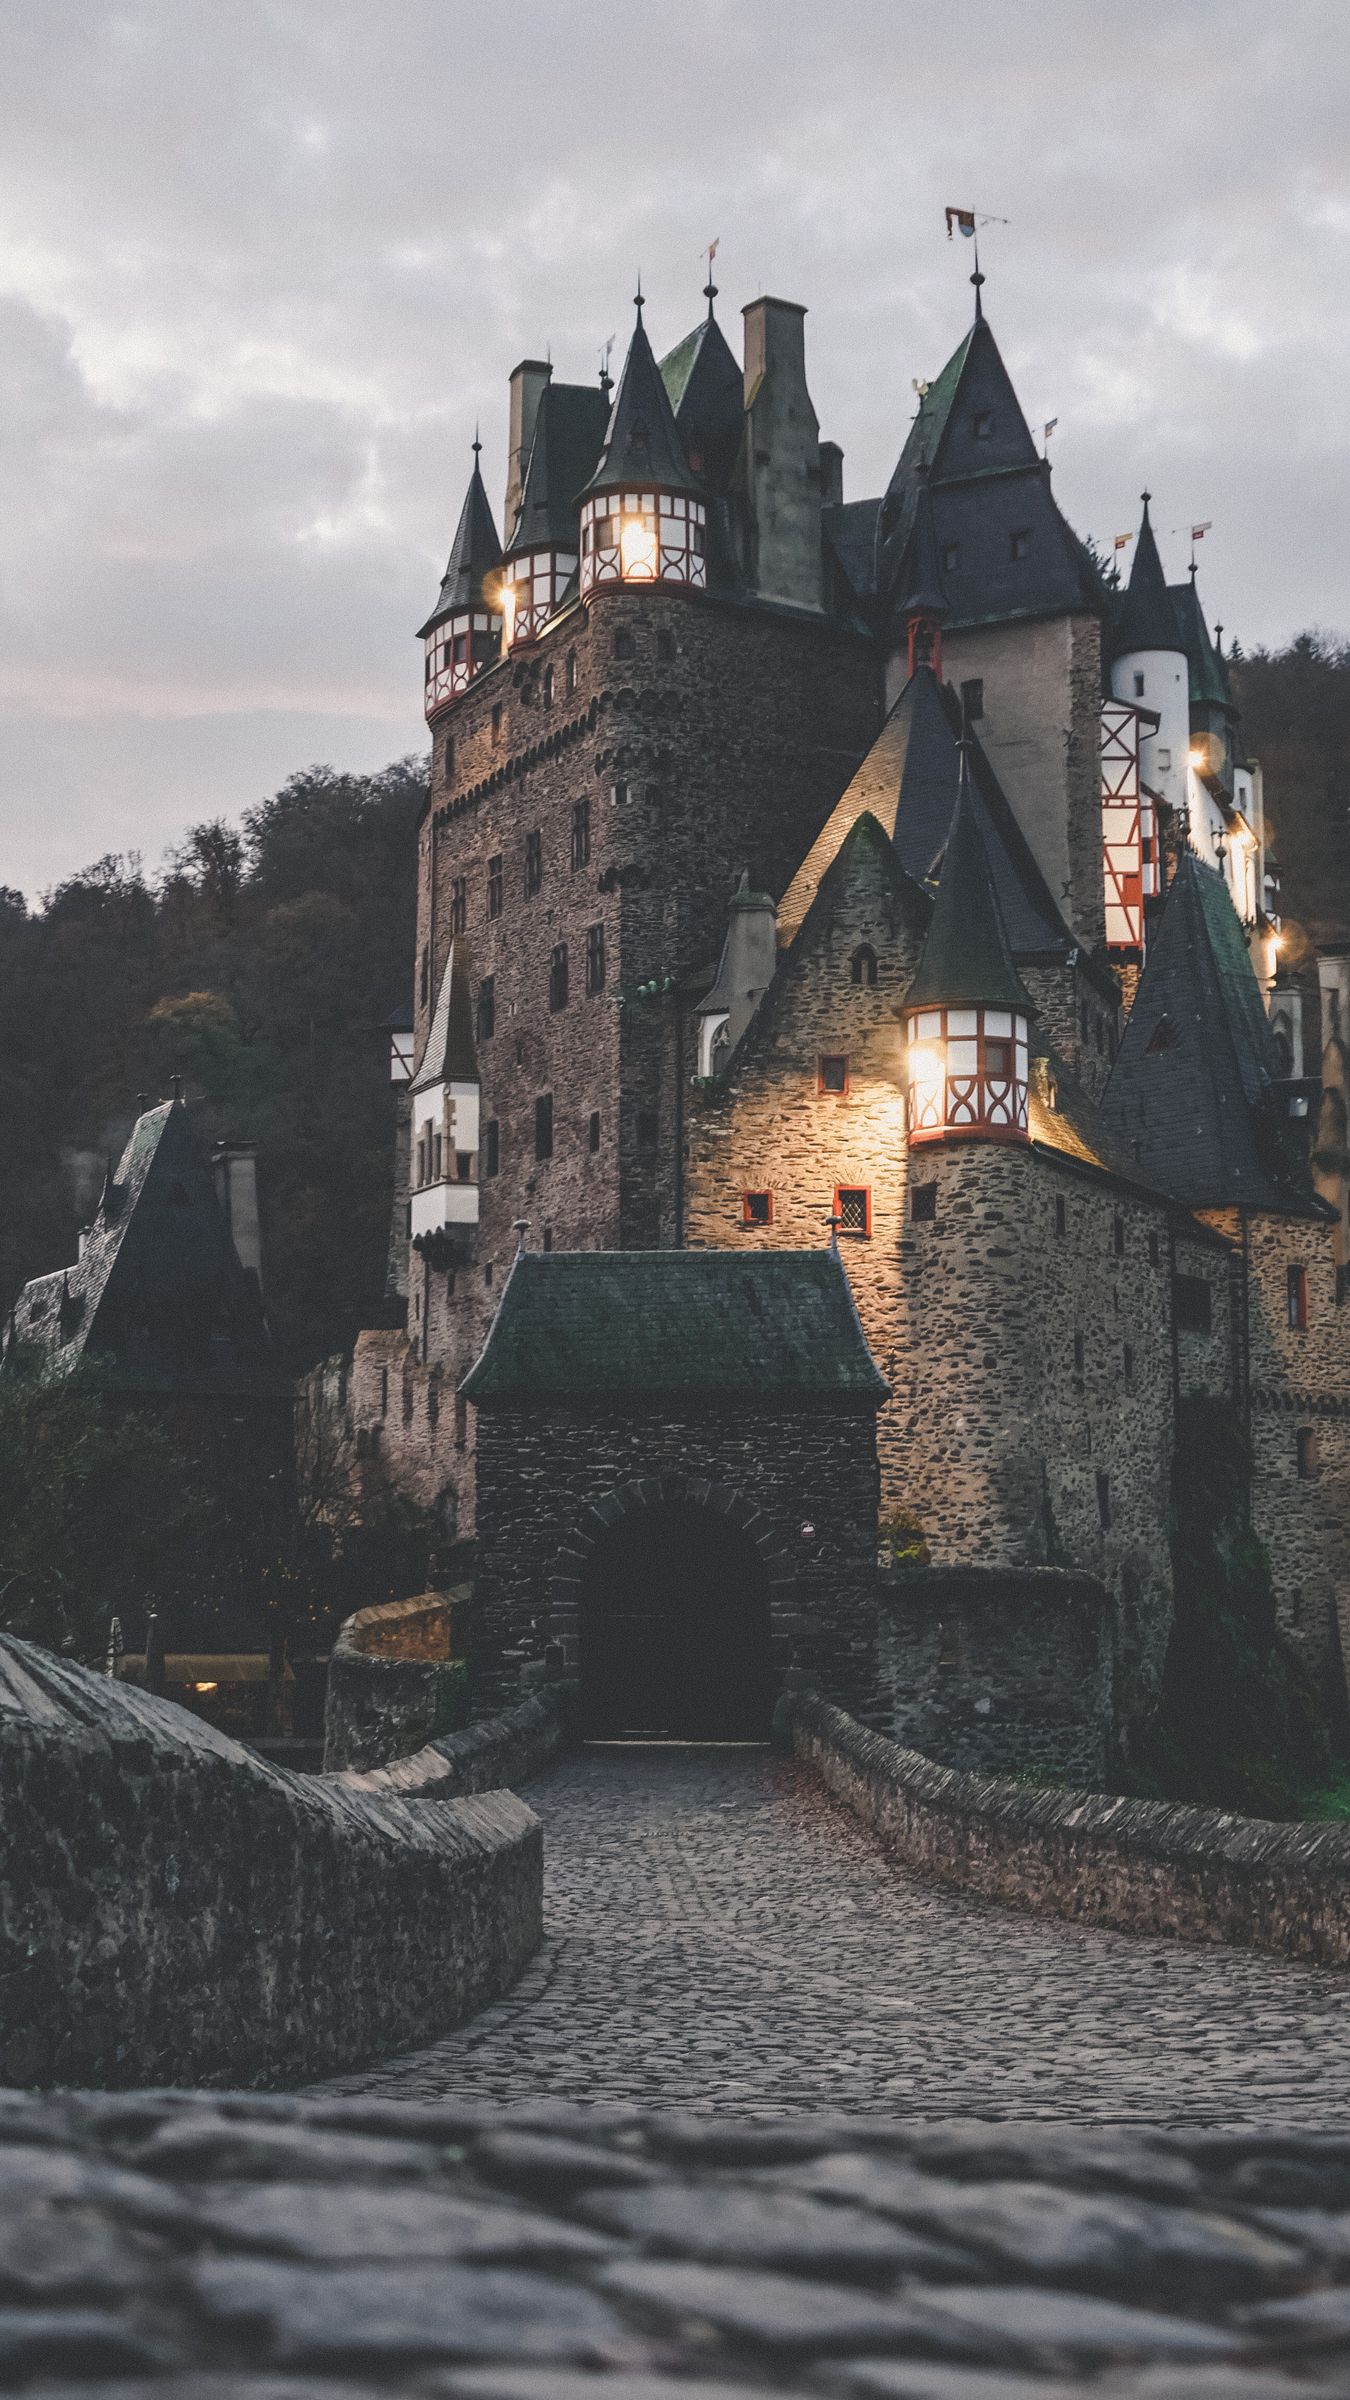 Download wallpaper 1350x2400 castle, building, architecture, old, medieval  iphone 8+/7+/6s+/6+ for parallax hd background